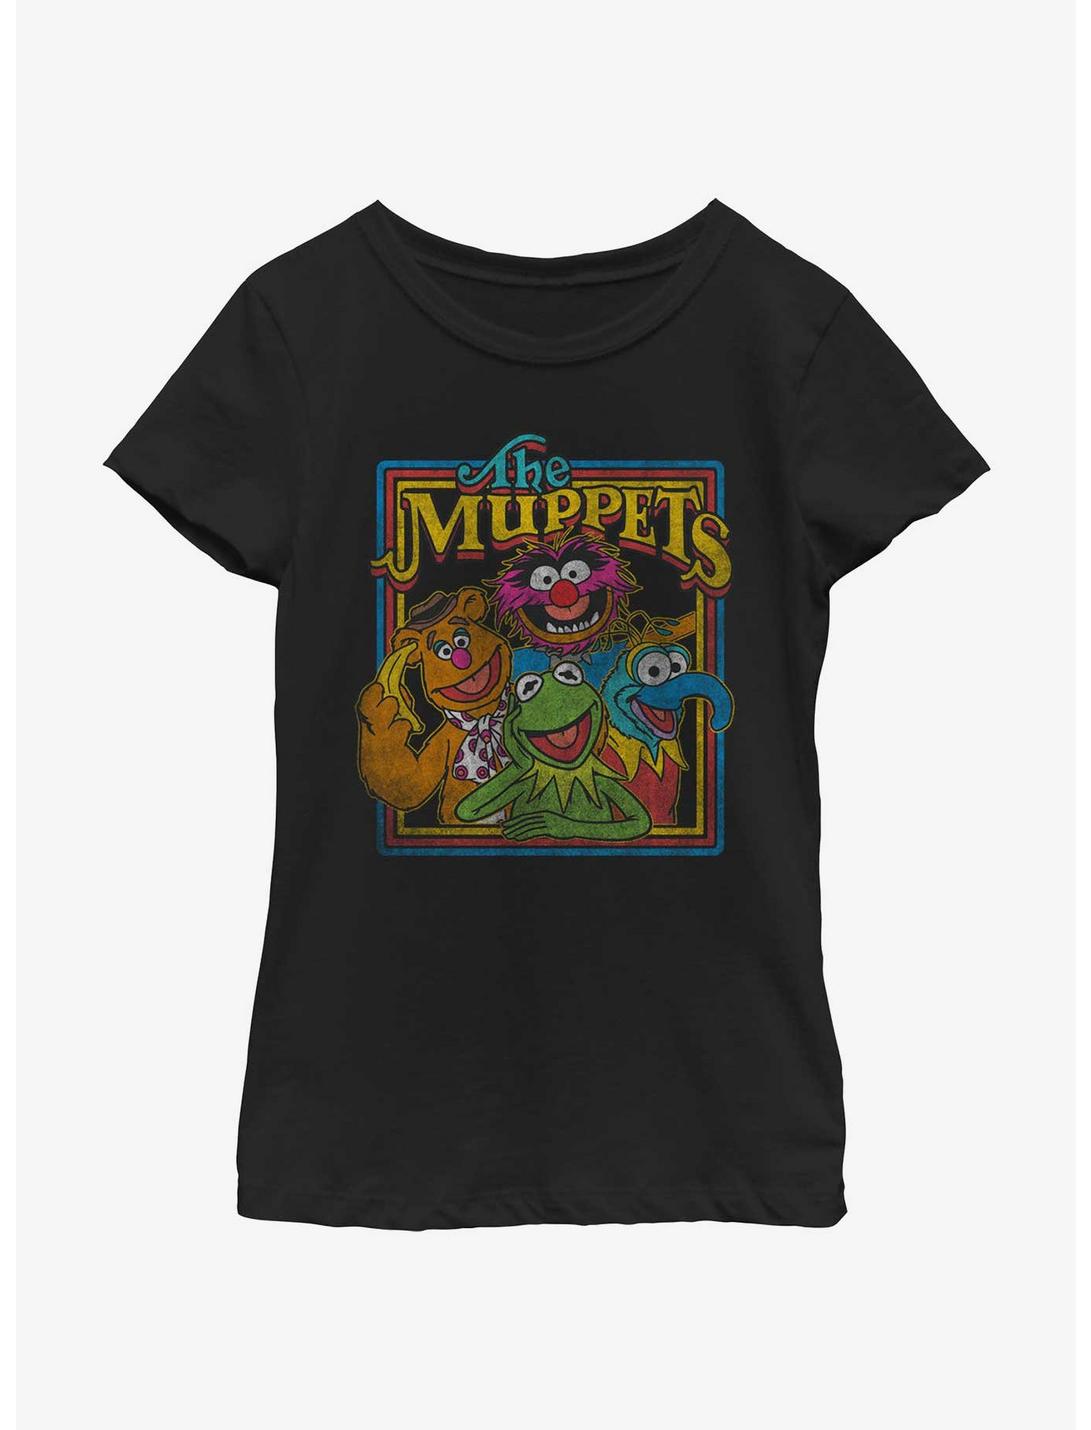 Disney The Muppets Retro Muppet Poster Girls Youth T-Shirt, BLACK, hi-res